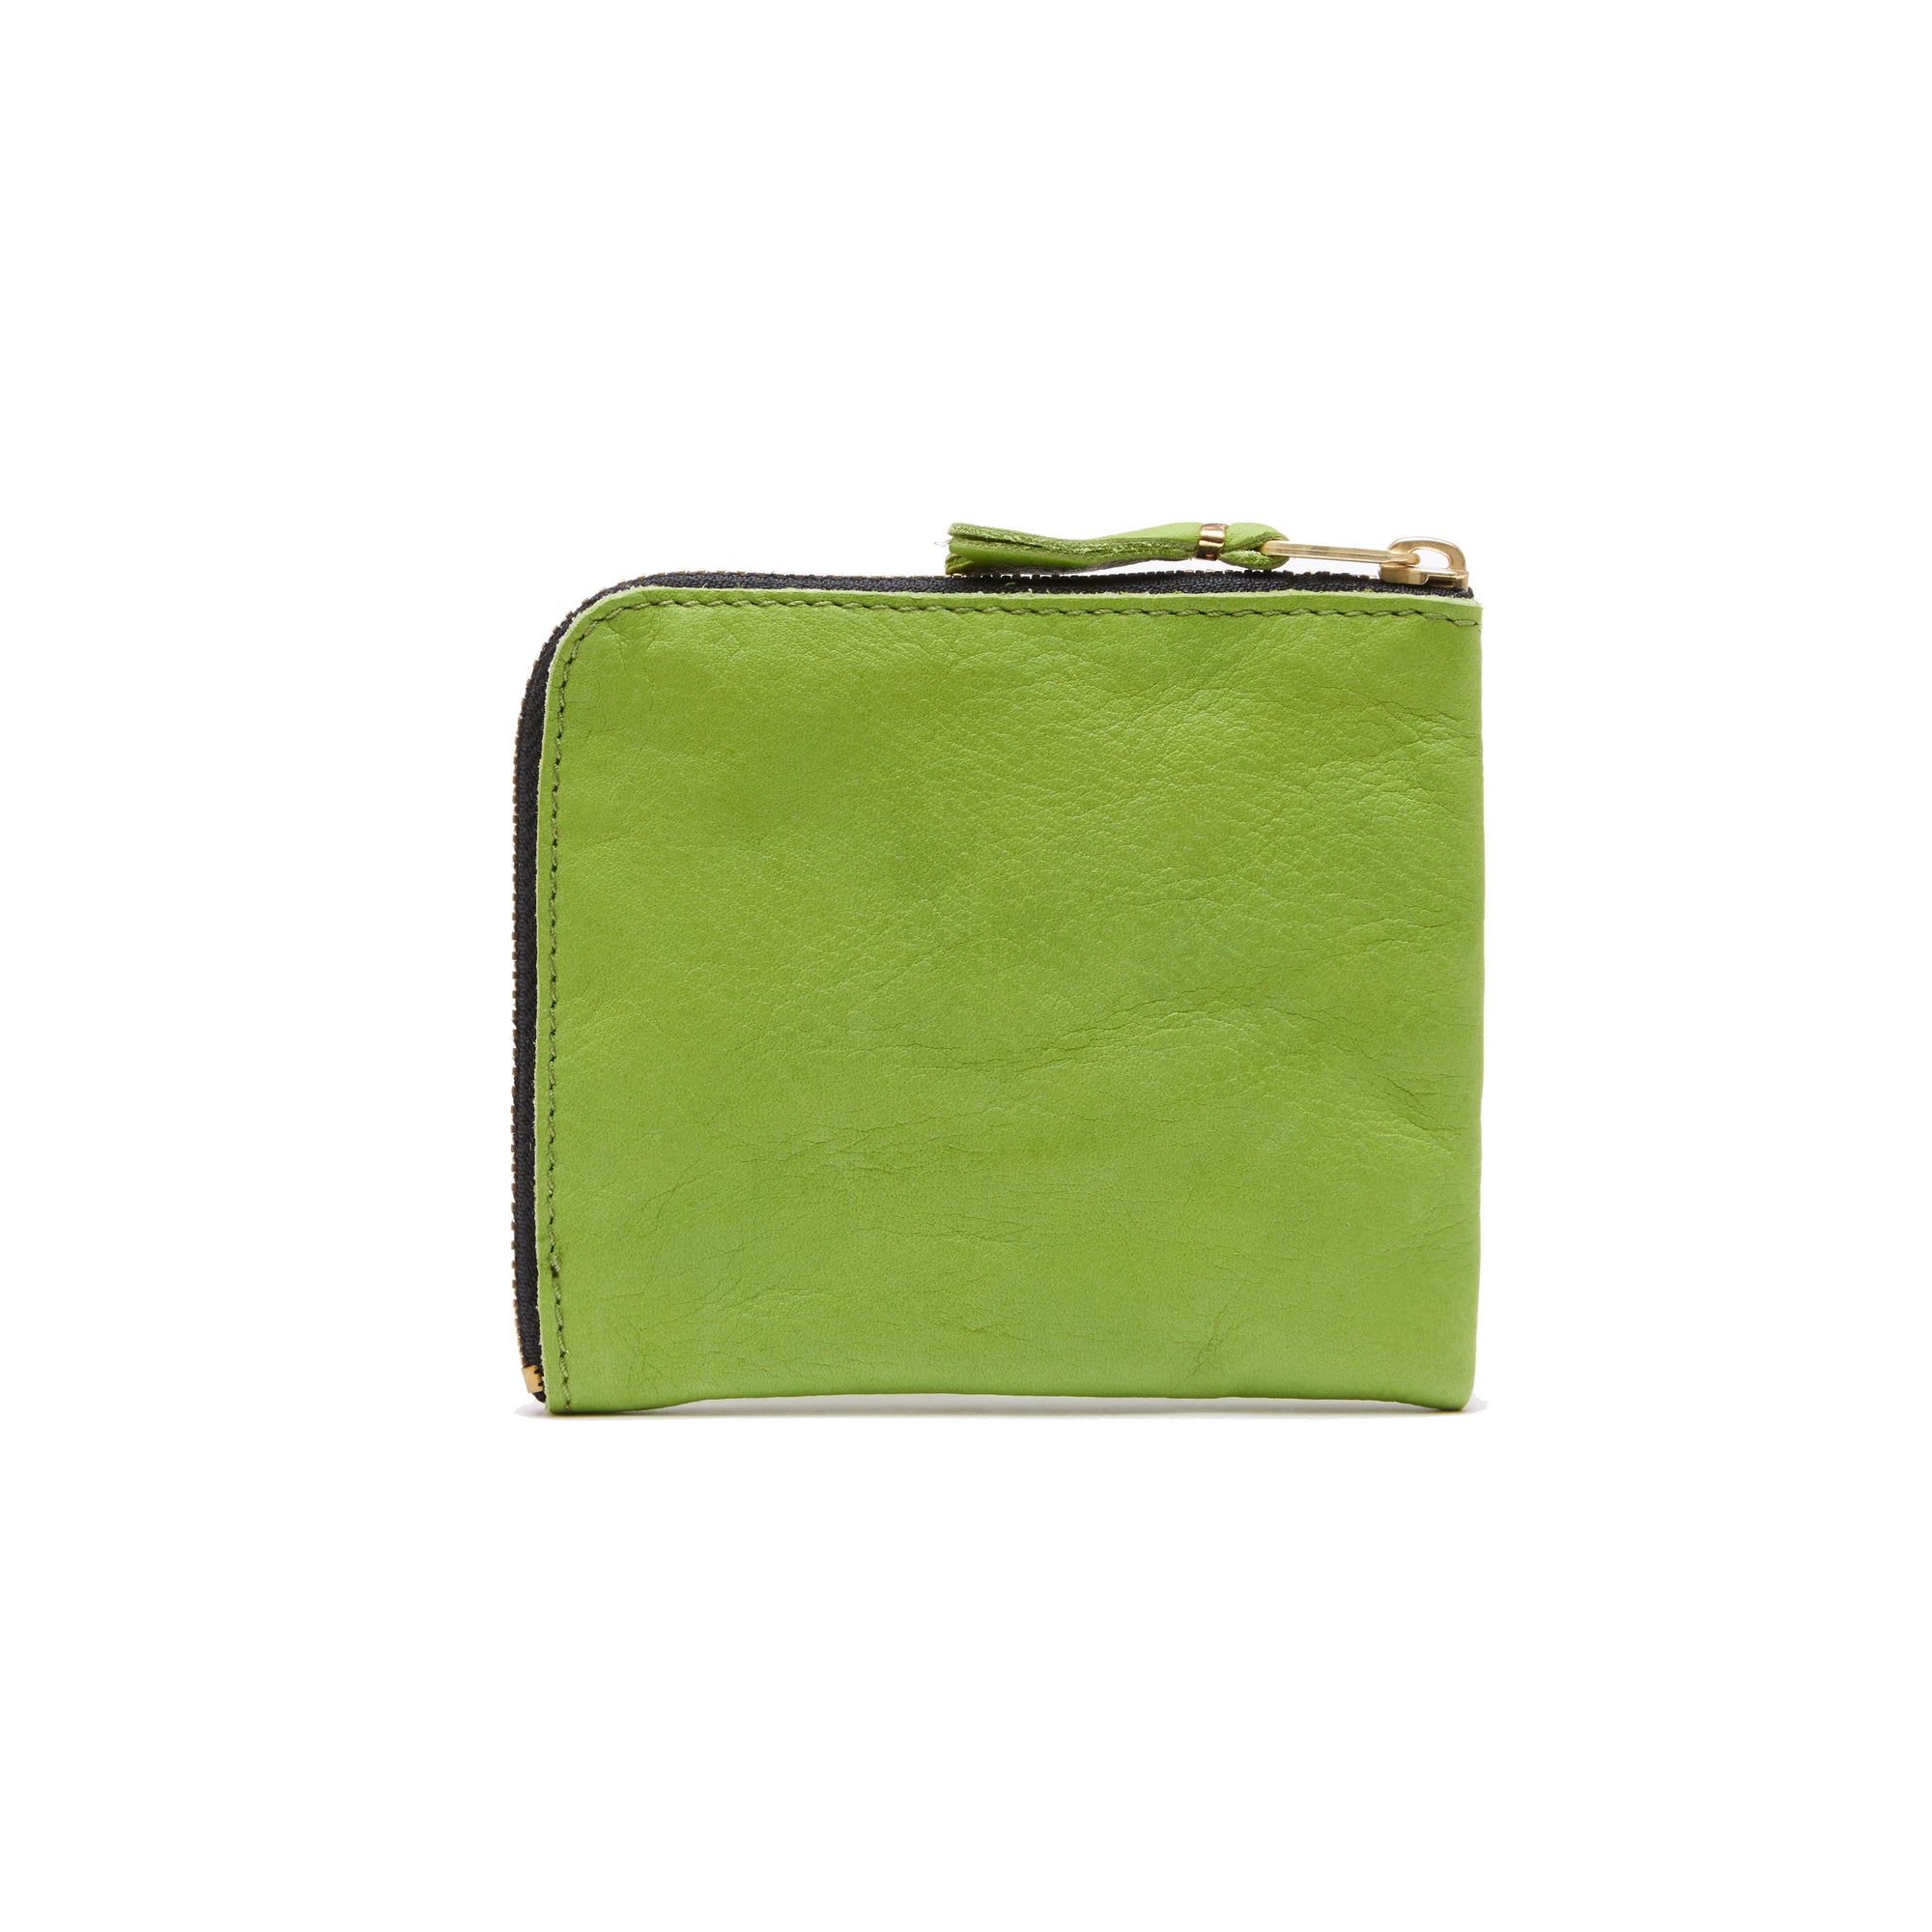 CDG WALLET - Washed Wallet - (8Z-Y031 Green) view 2